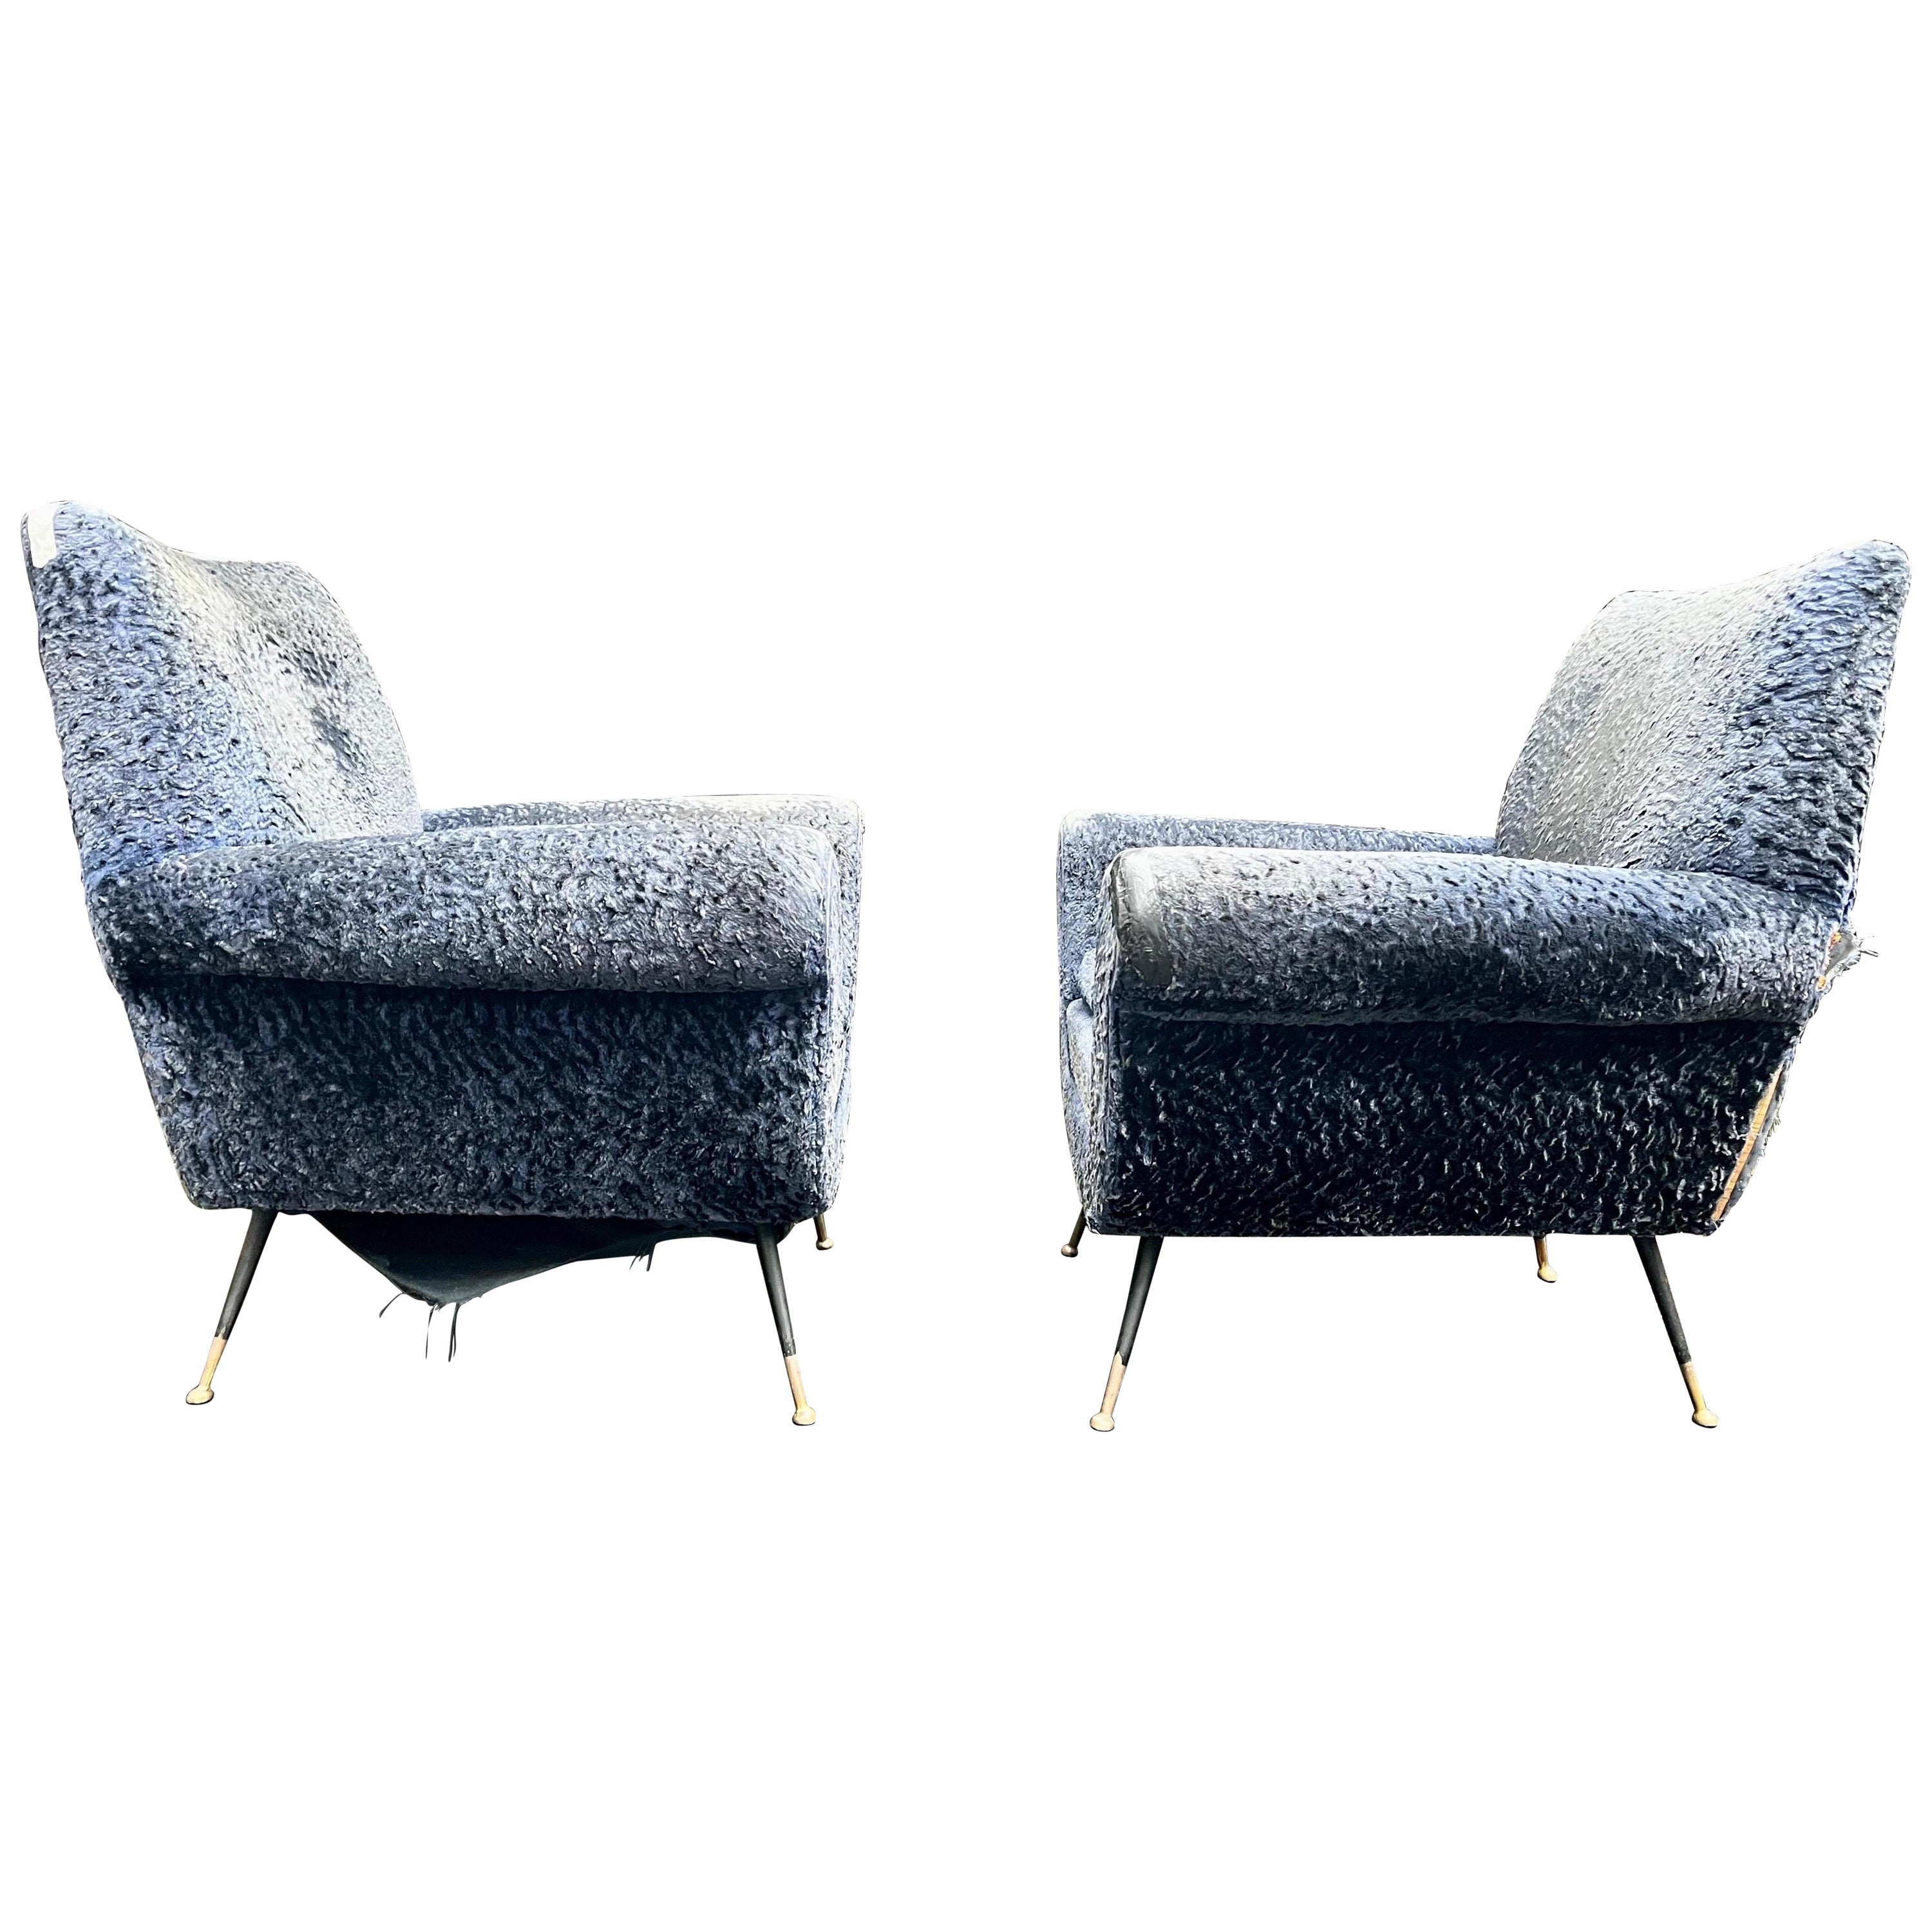 Pair of Gigi Radice Club Chairs for Minotti, c. 1950 (for restoration) For Sale